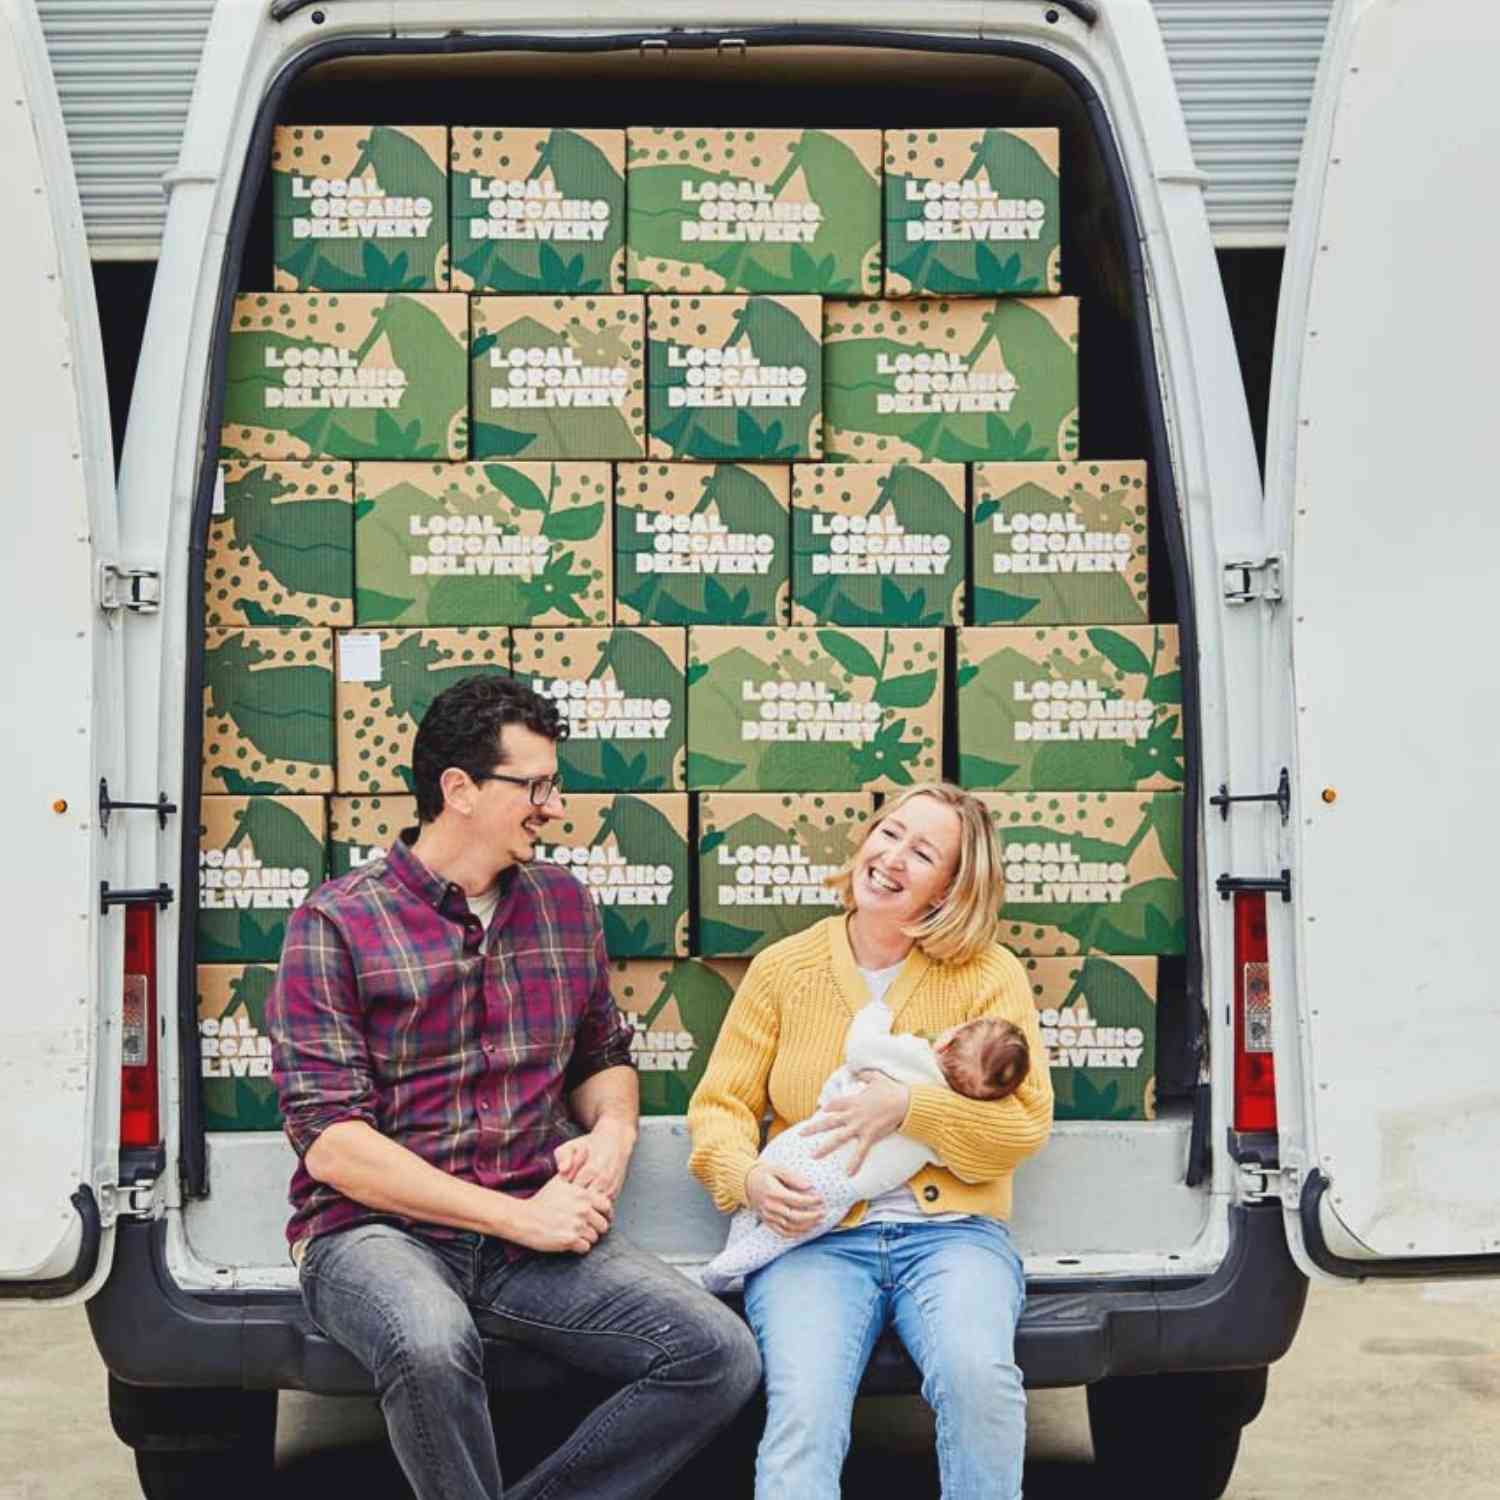 Local Organic Delivery connects people in Melbourne with farm fresh organic produce from around Victoria